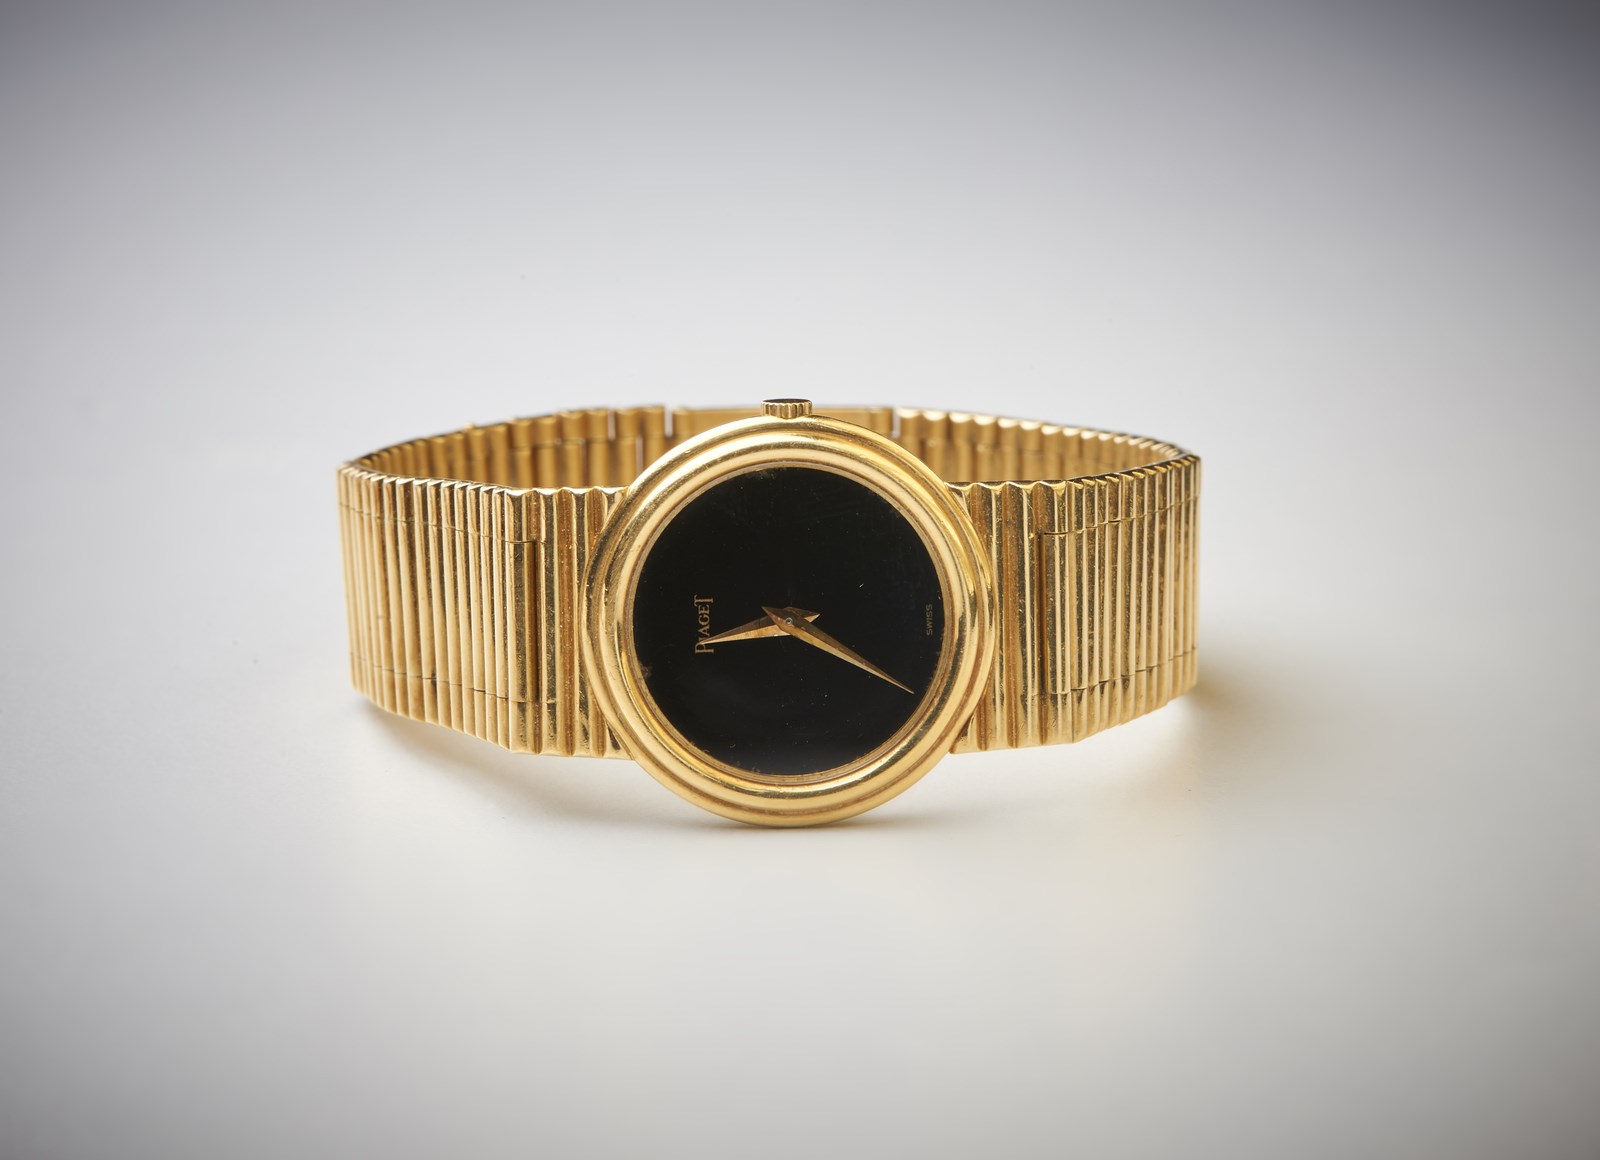 Women’s watch "ultra slim" with round case, black dial in yellow gold 750/1000, model 9040 G1  (Piaget )